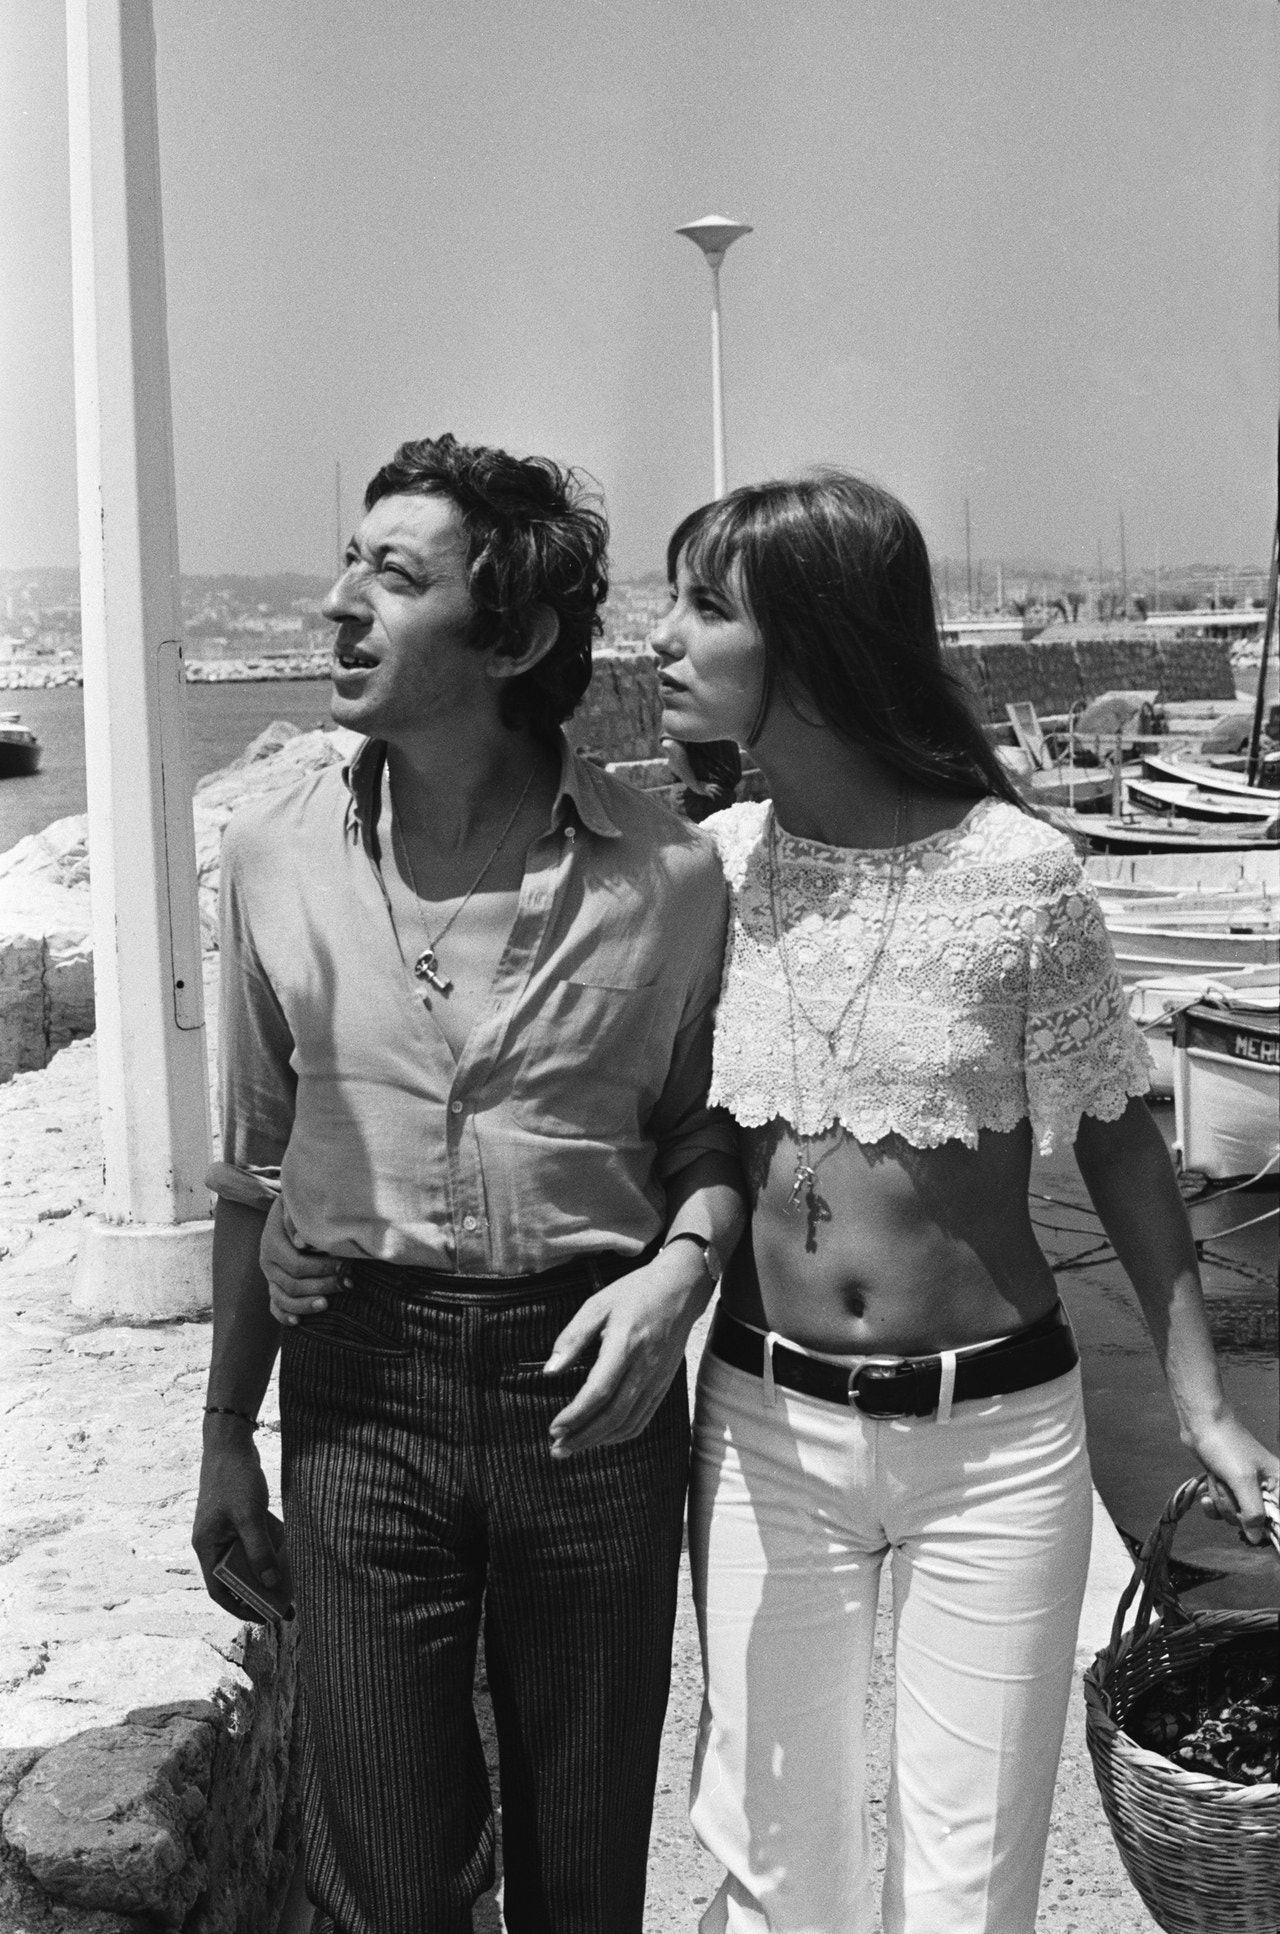 At 70, Jane Birkin's Style Is More Iconic Than Ever - At 70, Jane Birkin's Style Is More Iconic Than Ever -   1960s style Icons